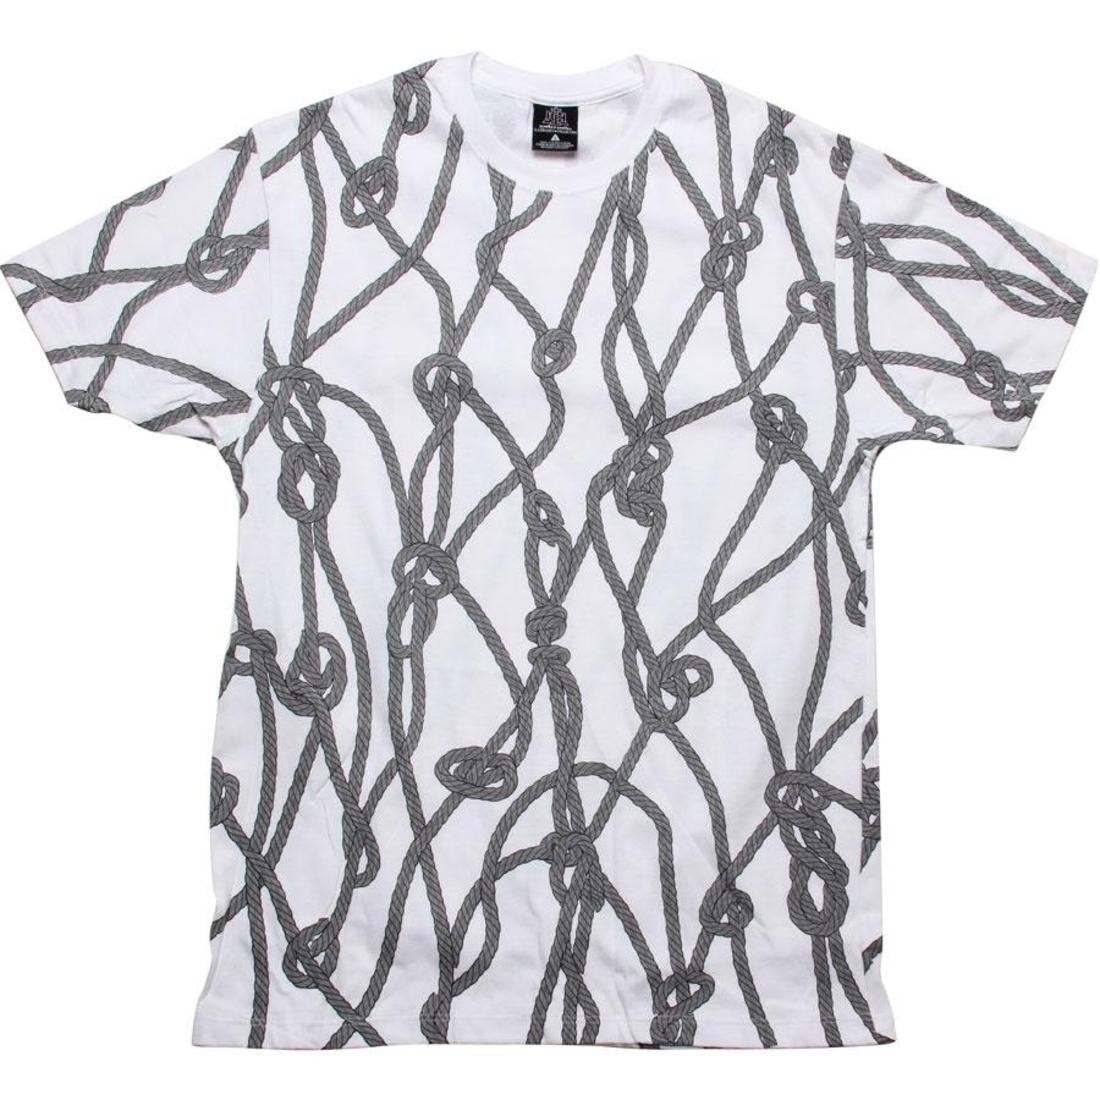 Crooks and Castles Fort Knots Tee (white)